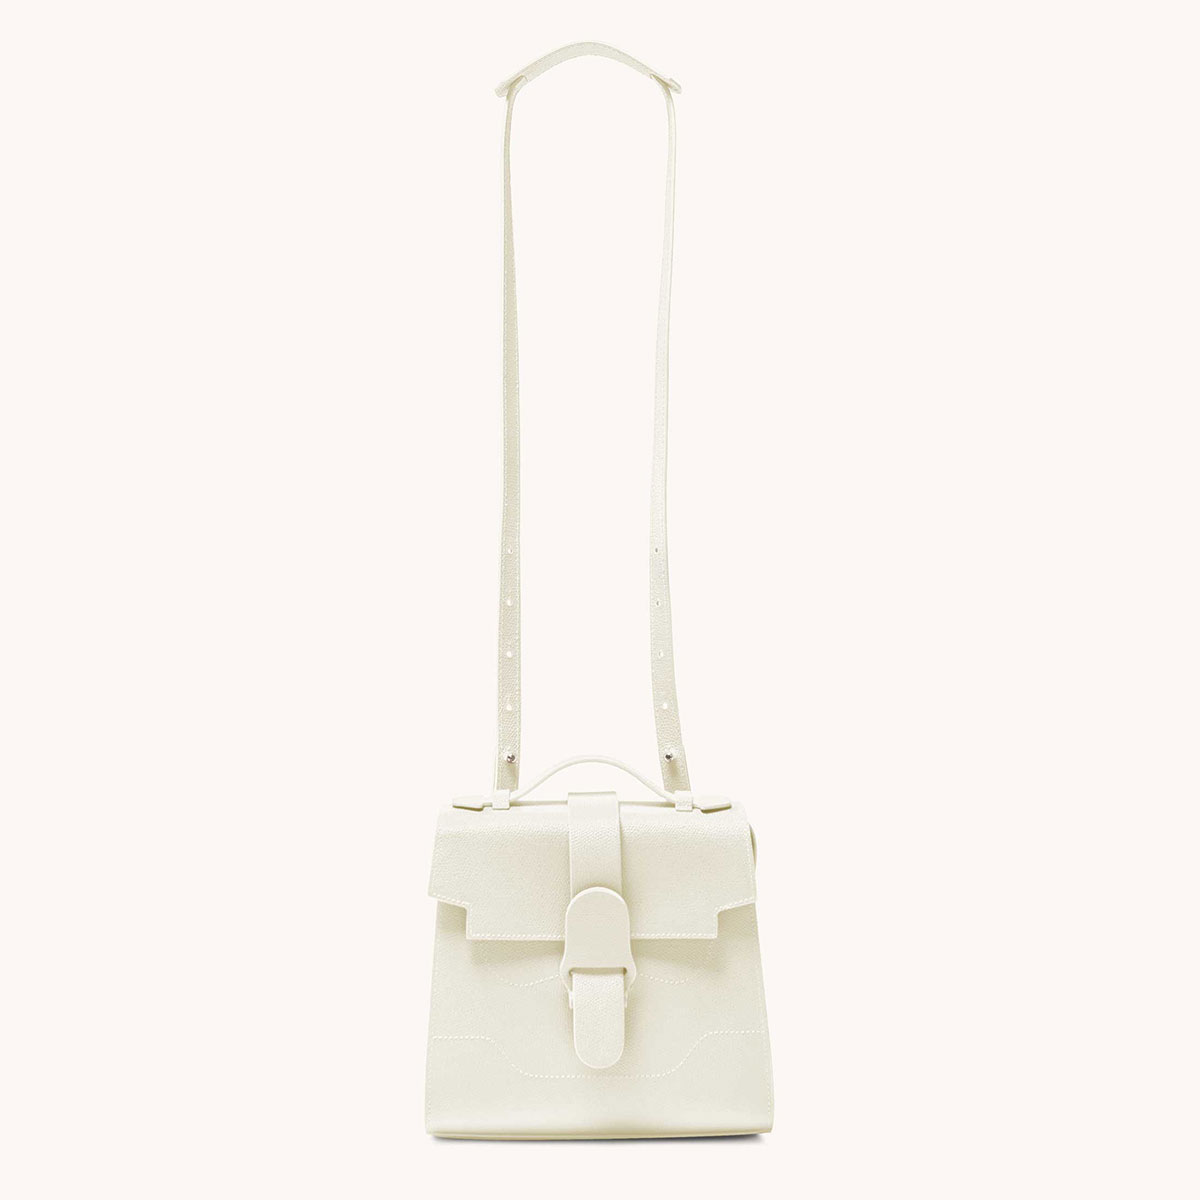 alunna bag pebbled cream side view with long strap